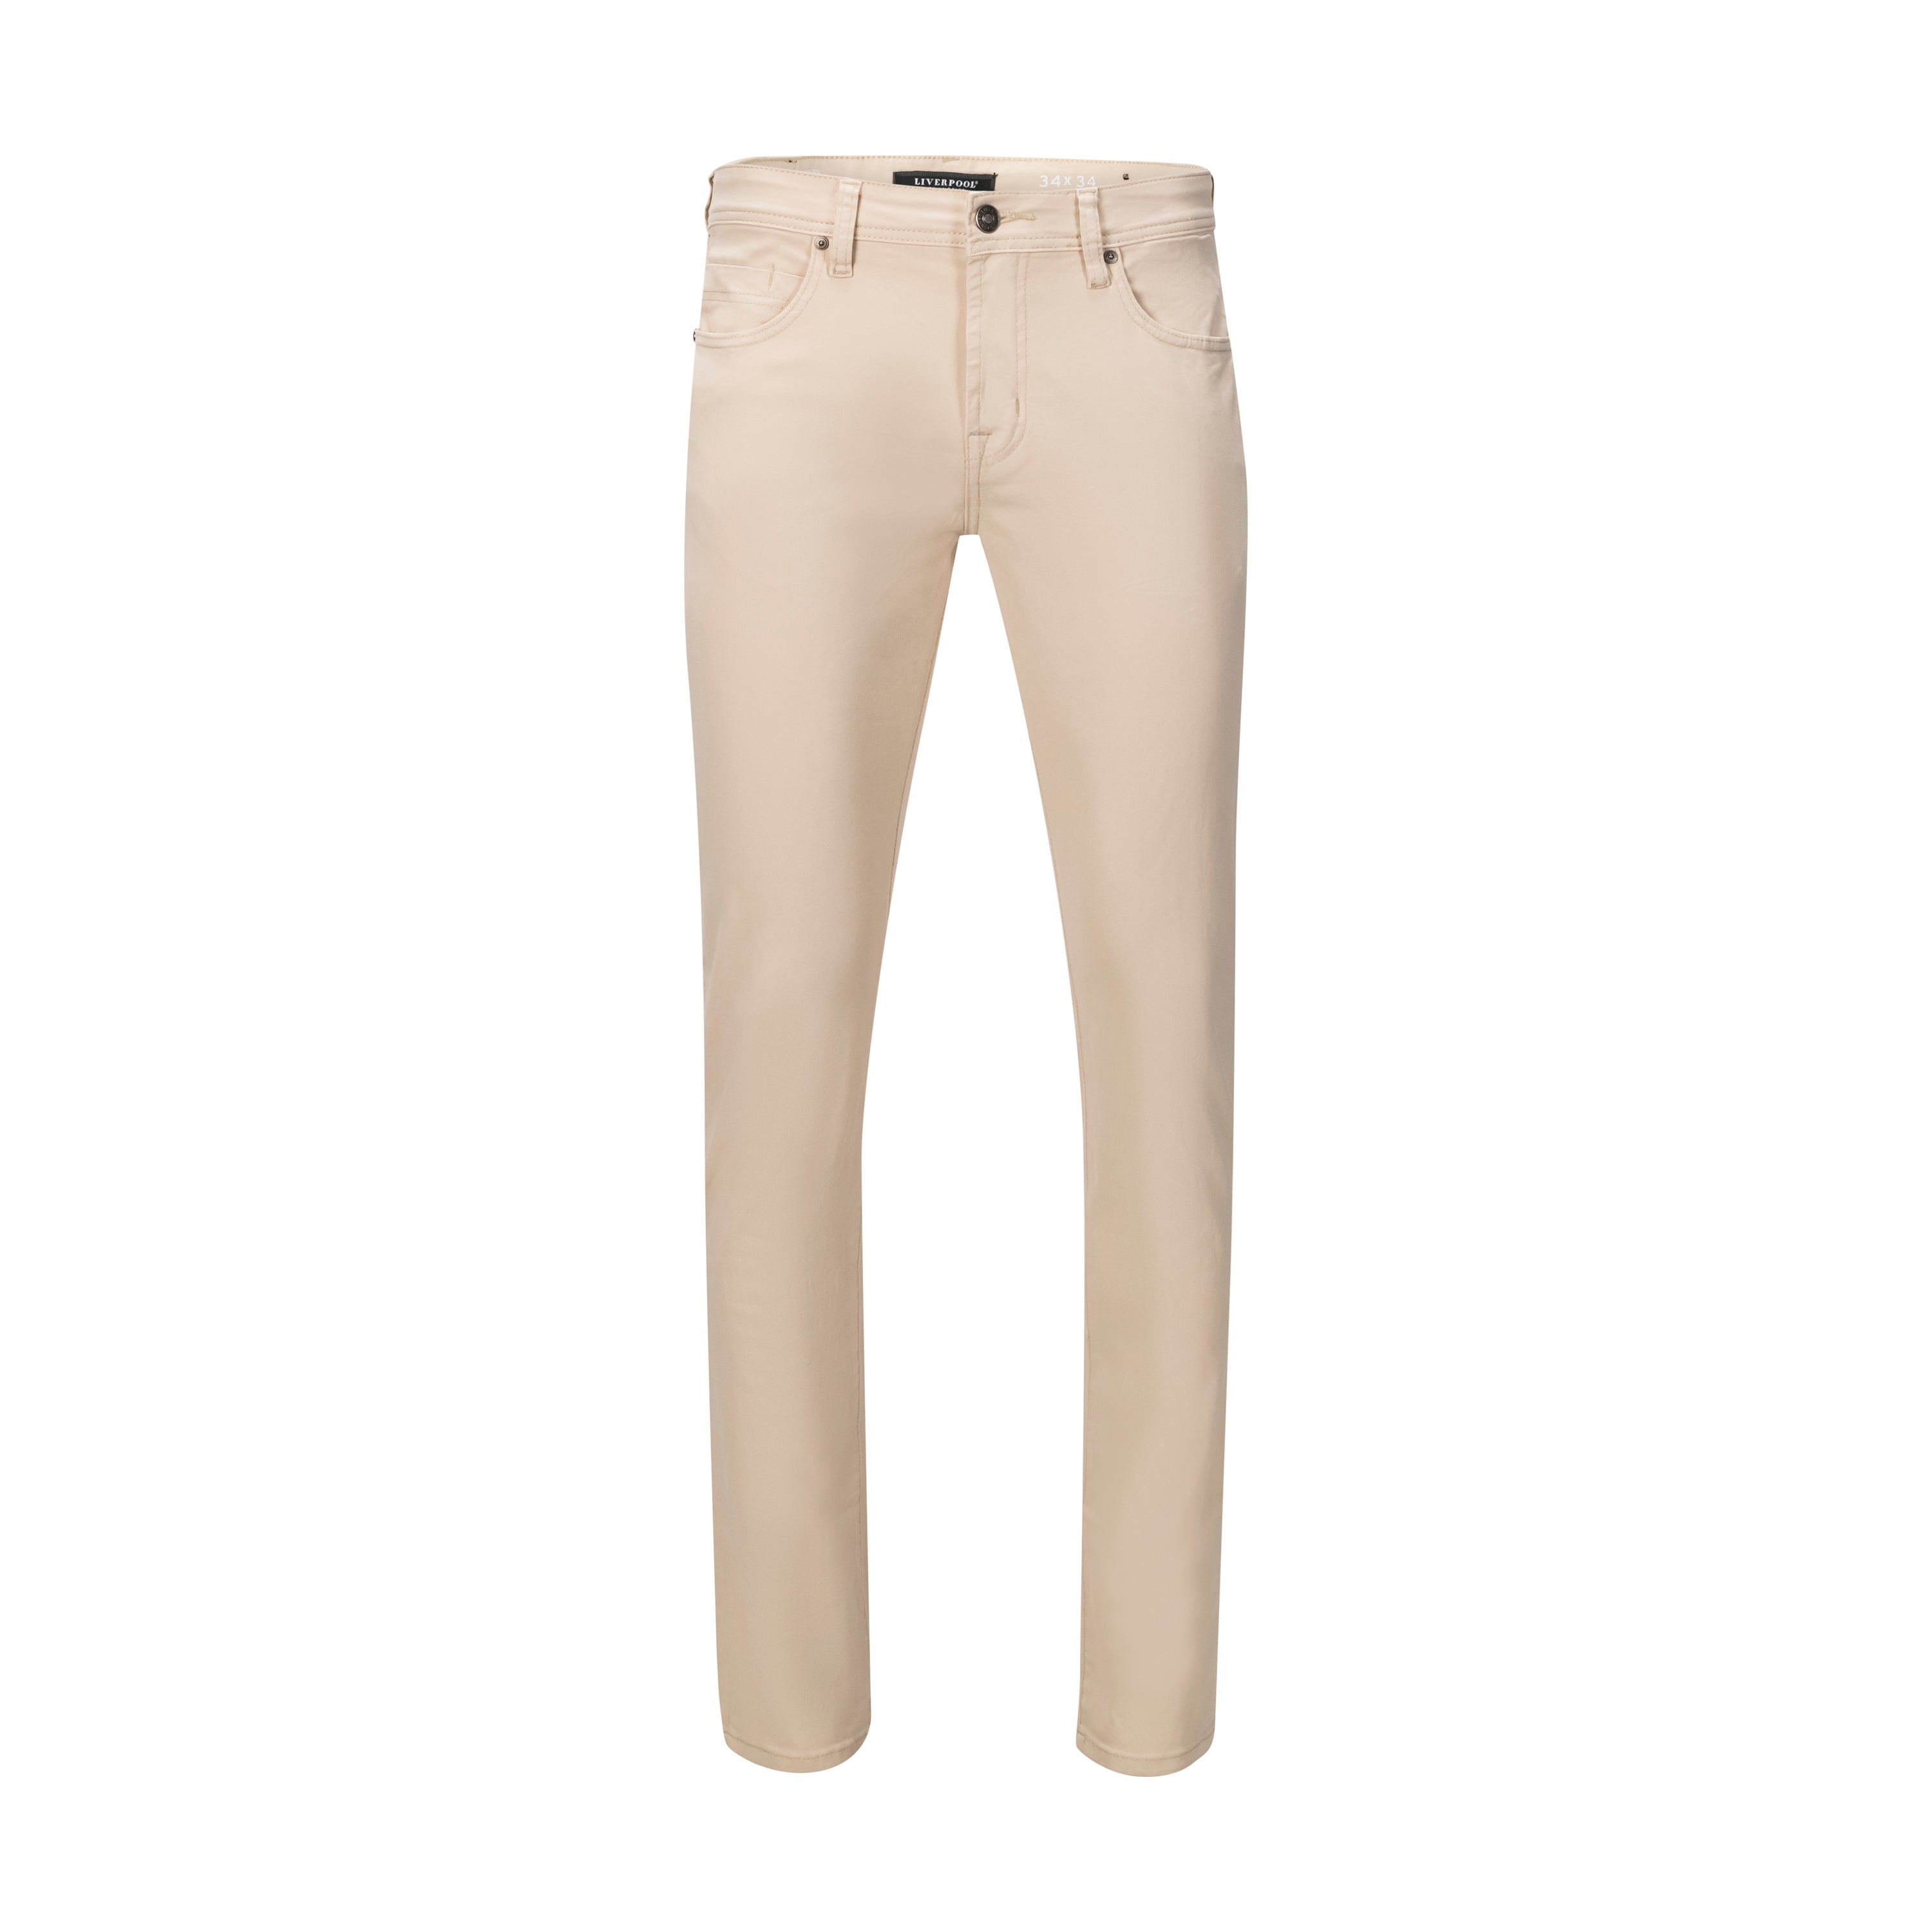 LIVERPOOL MODERN STRAIGHT TWILL – Miltons - The Store for Men